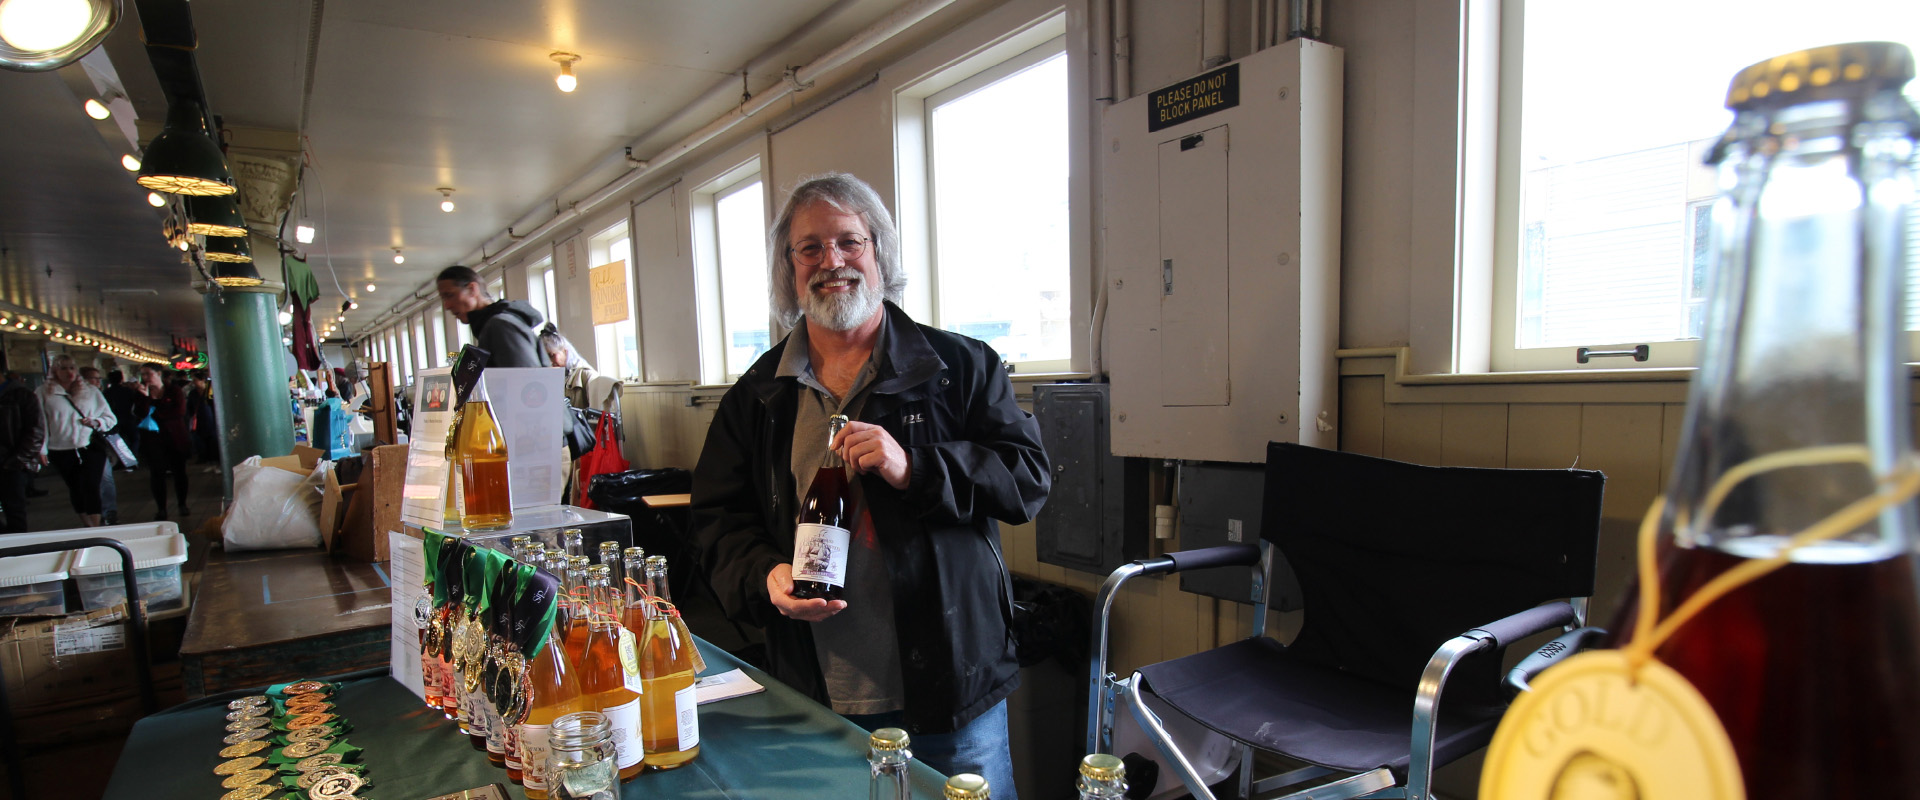 Nick from Puget Sound Cider Company smiles while behind his table in Pike Place Market in Seattle.